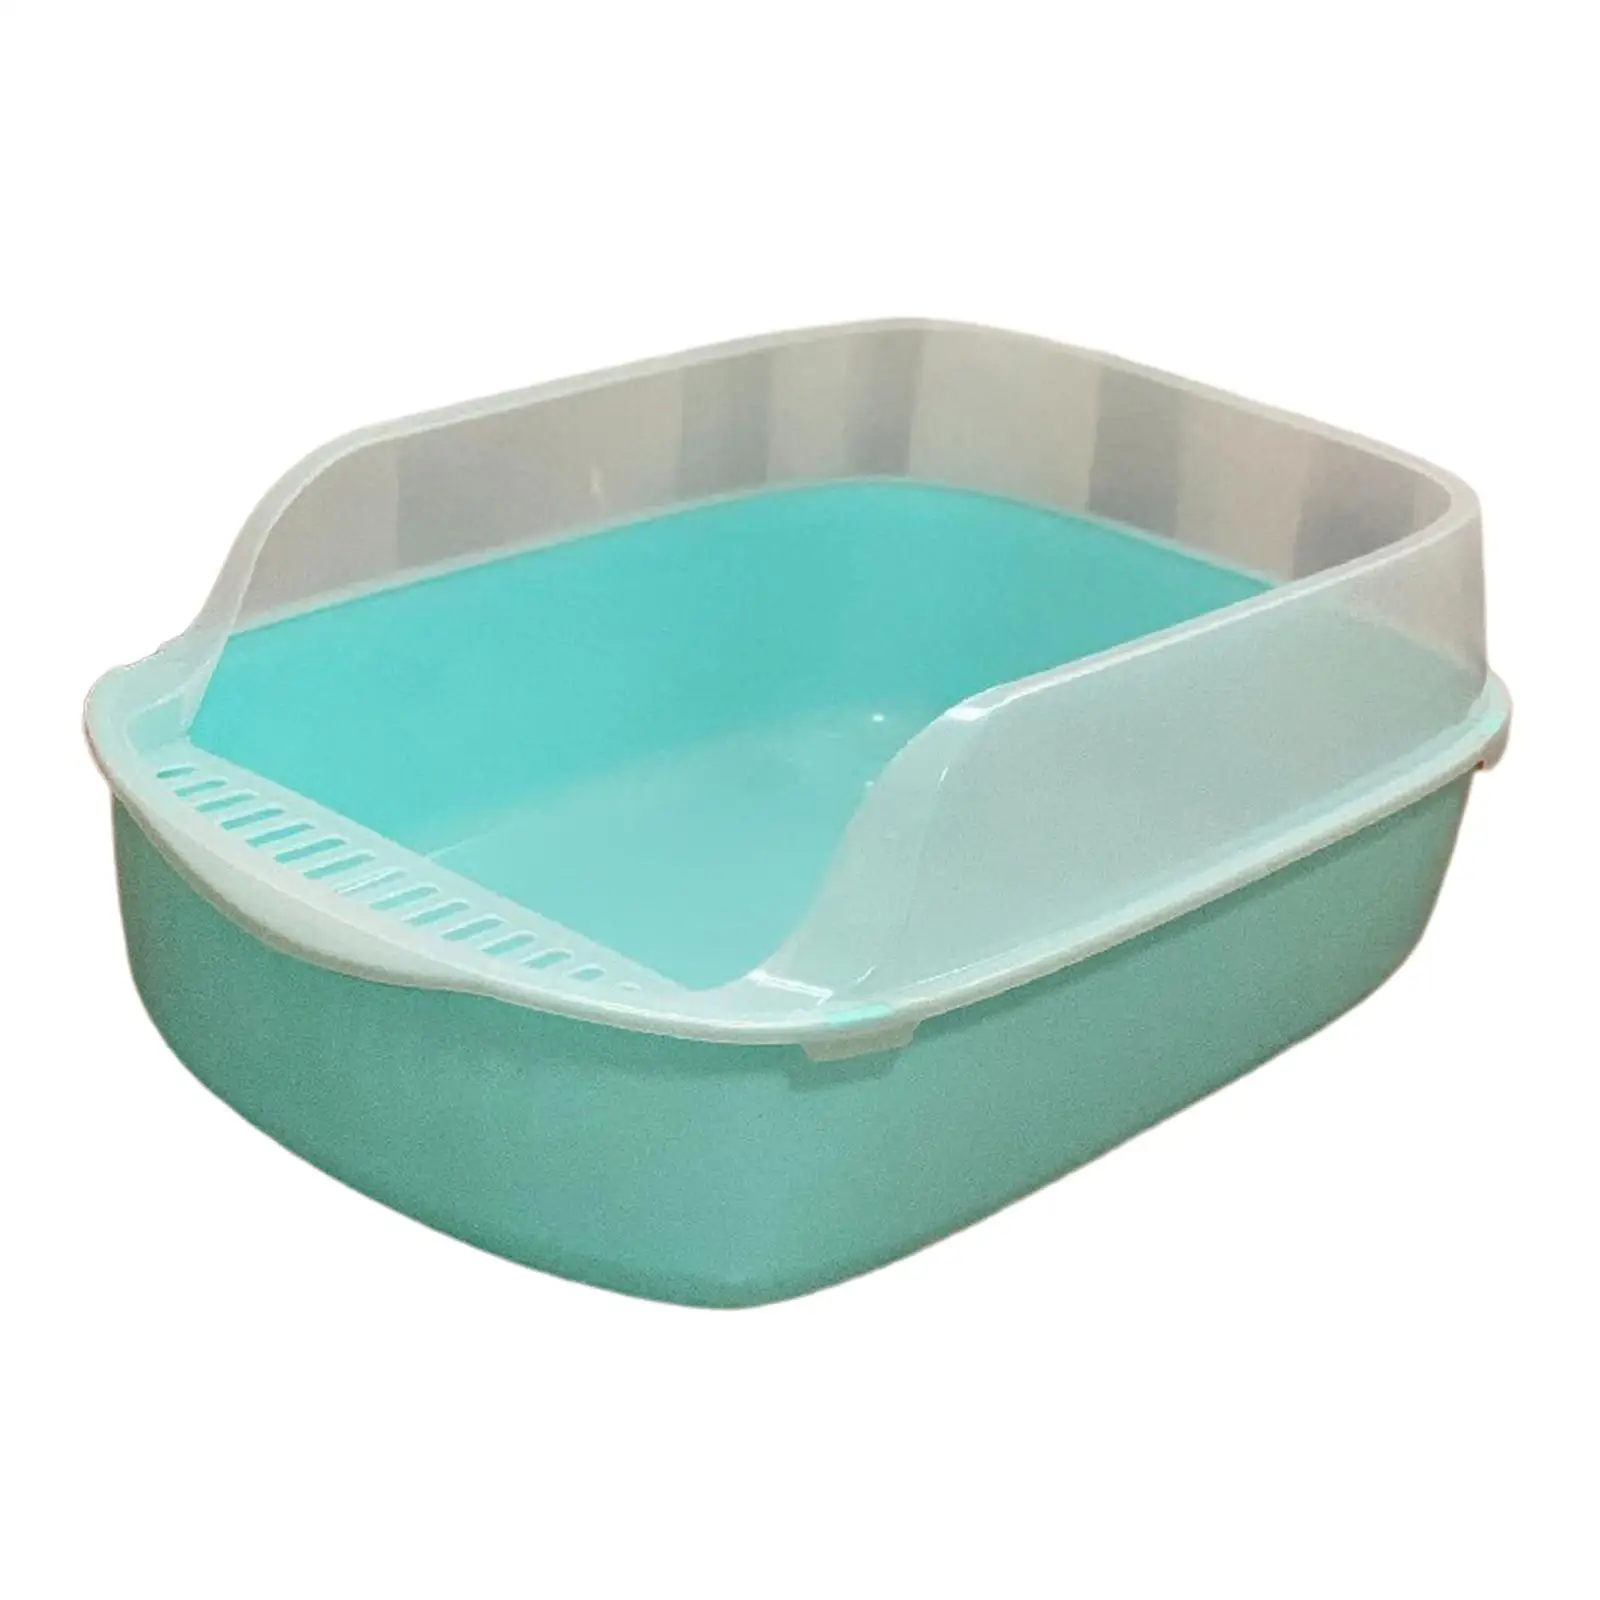 Cat Litter Box High Sided Durable Kitty Litter Tray Easy to Clean Open Top Pet Litter Tray for Indoor Cats Rabbit Small Animals